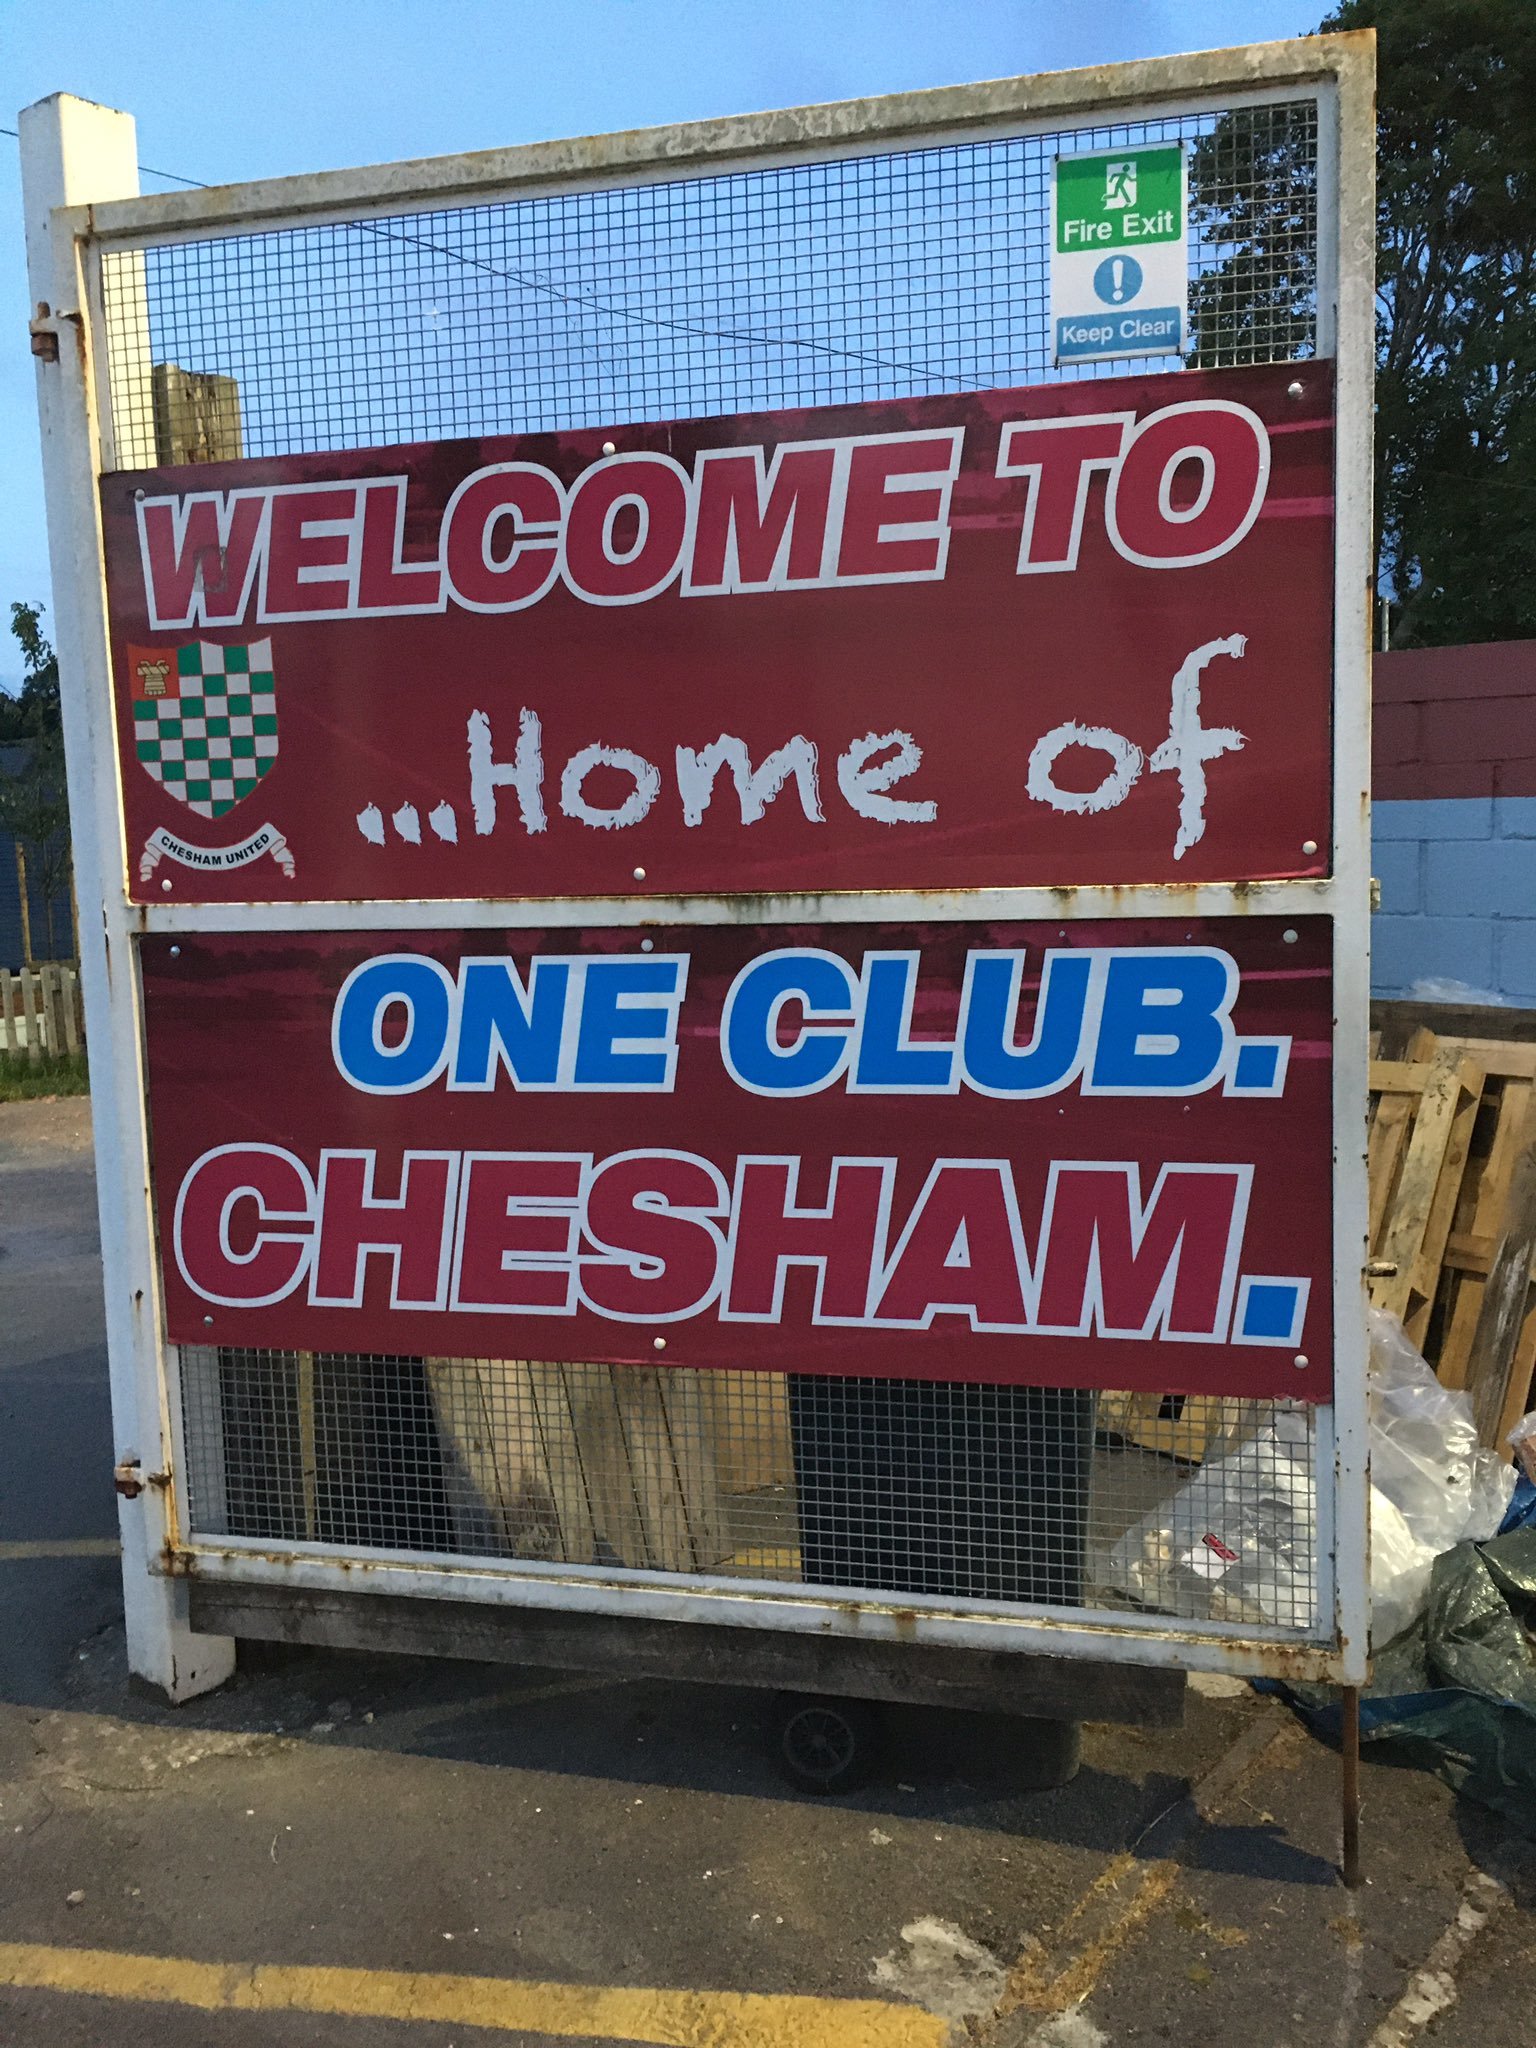 Some fans have also been spotted at Chesham matches, not just during the festive period, but, throughout the season